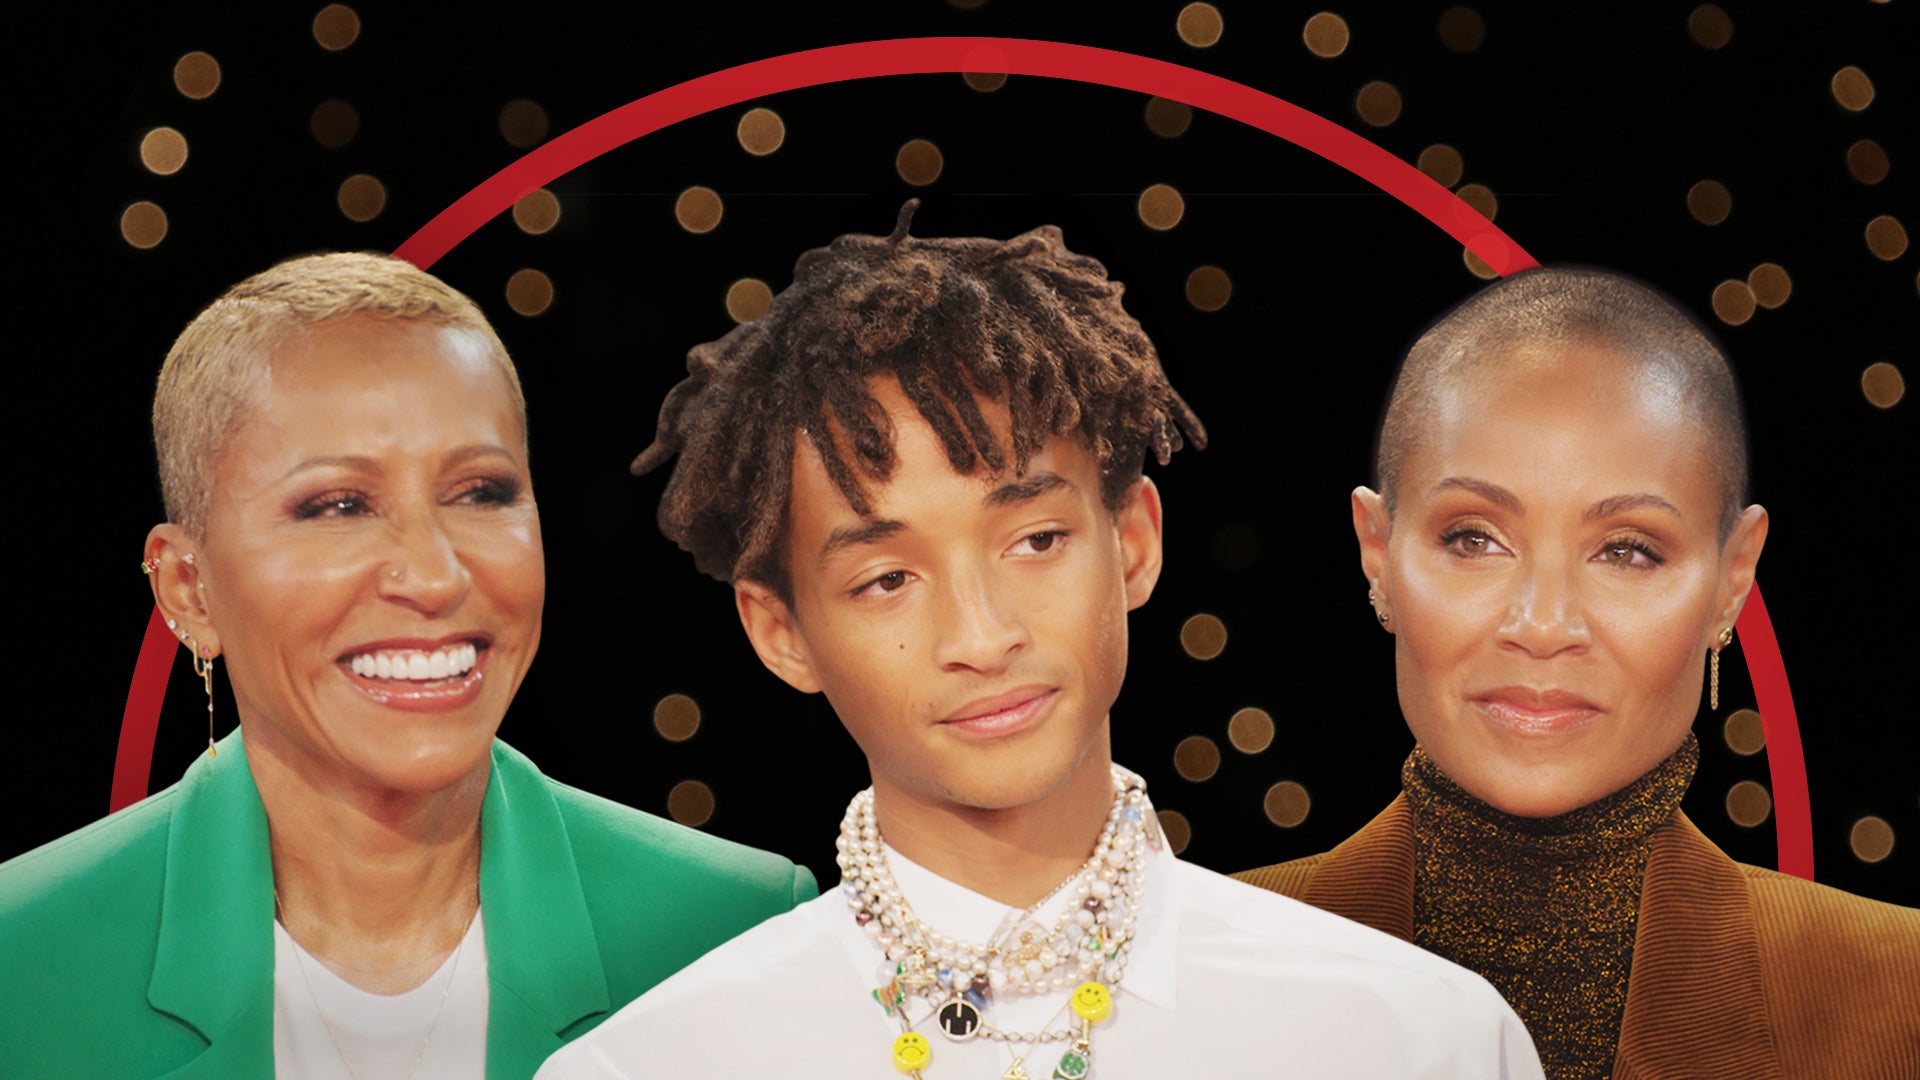 Jaden Smith reveals he 'gained 10lbs' after dad Will and mom Jada 'forced  an intervention' as he was 'wasting away